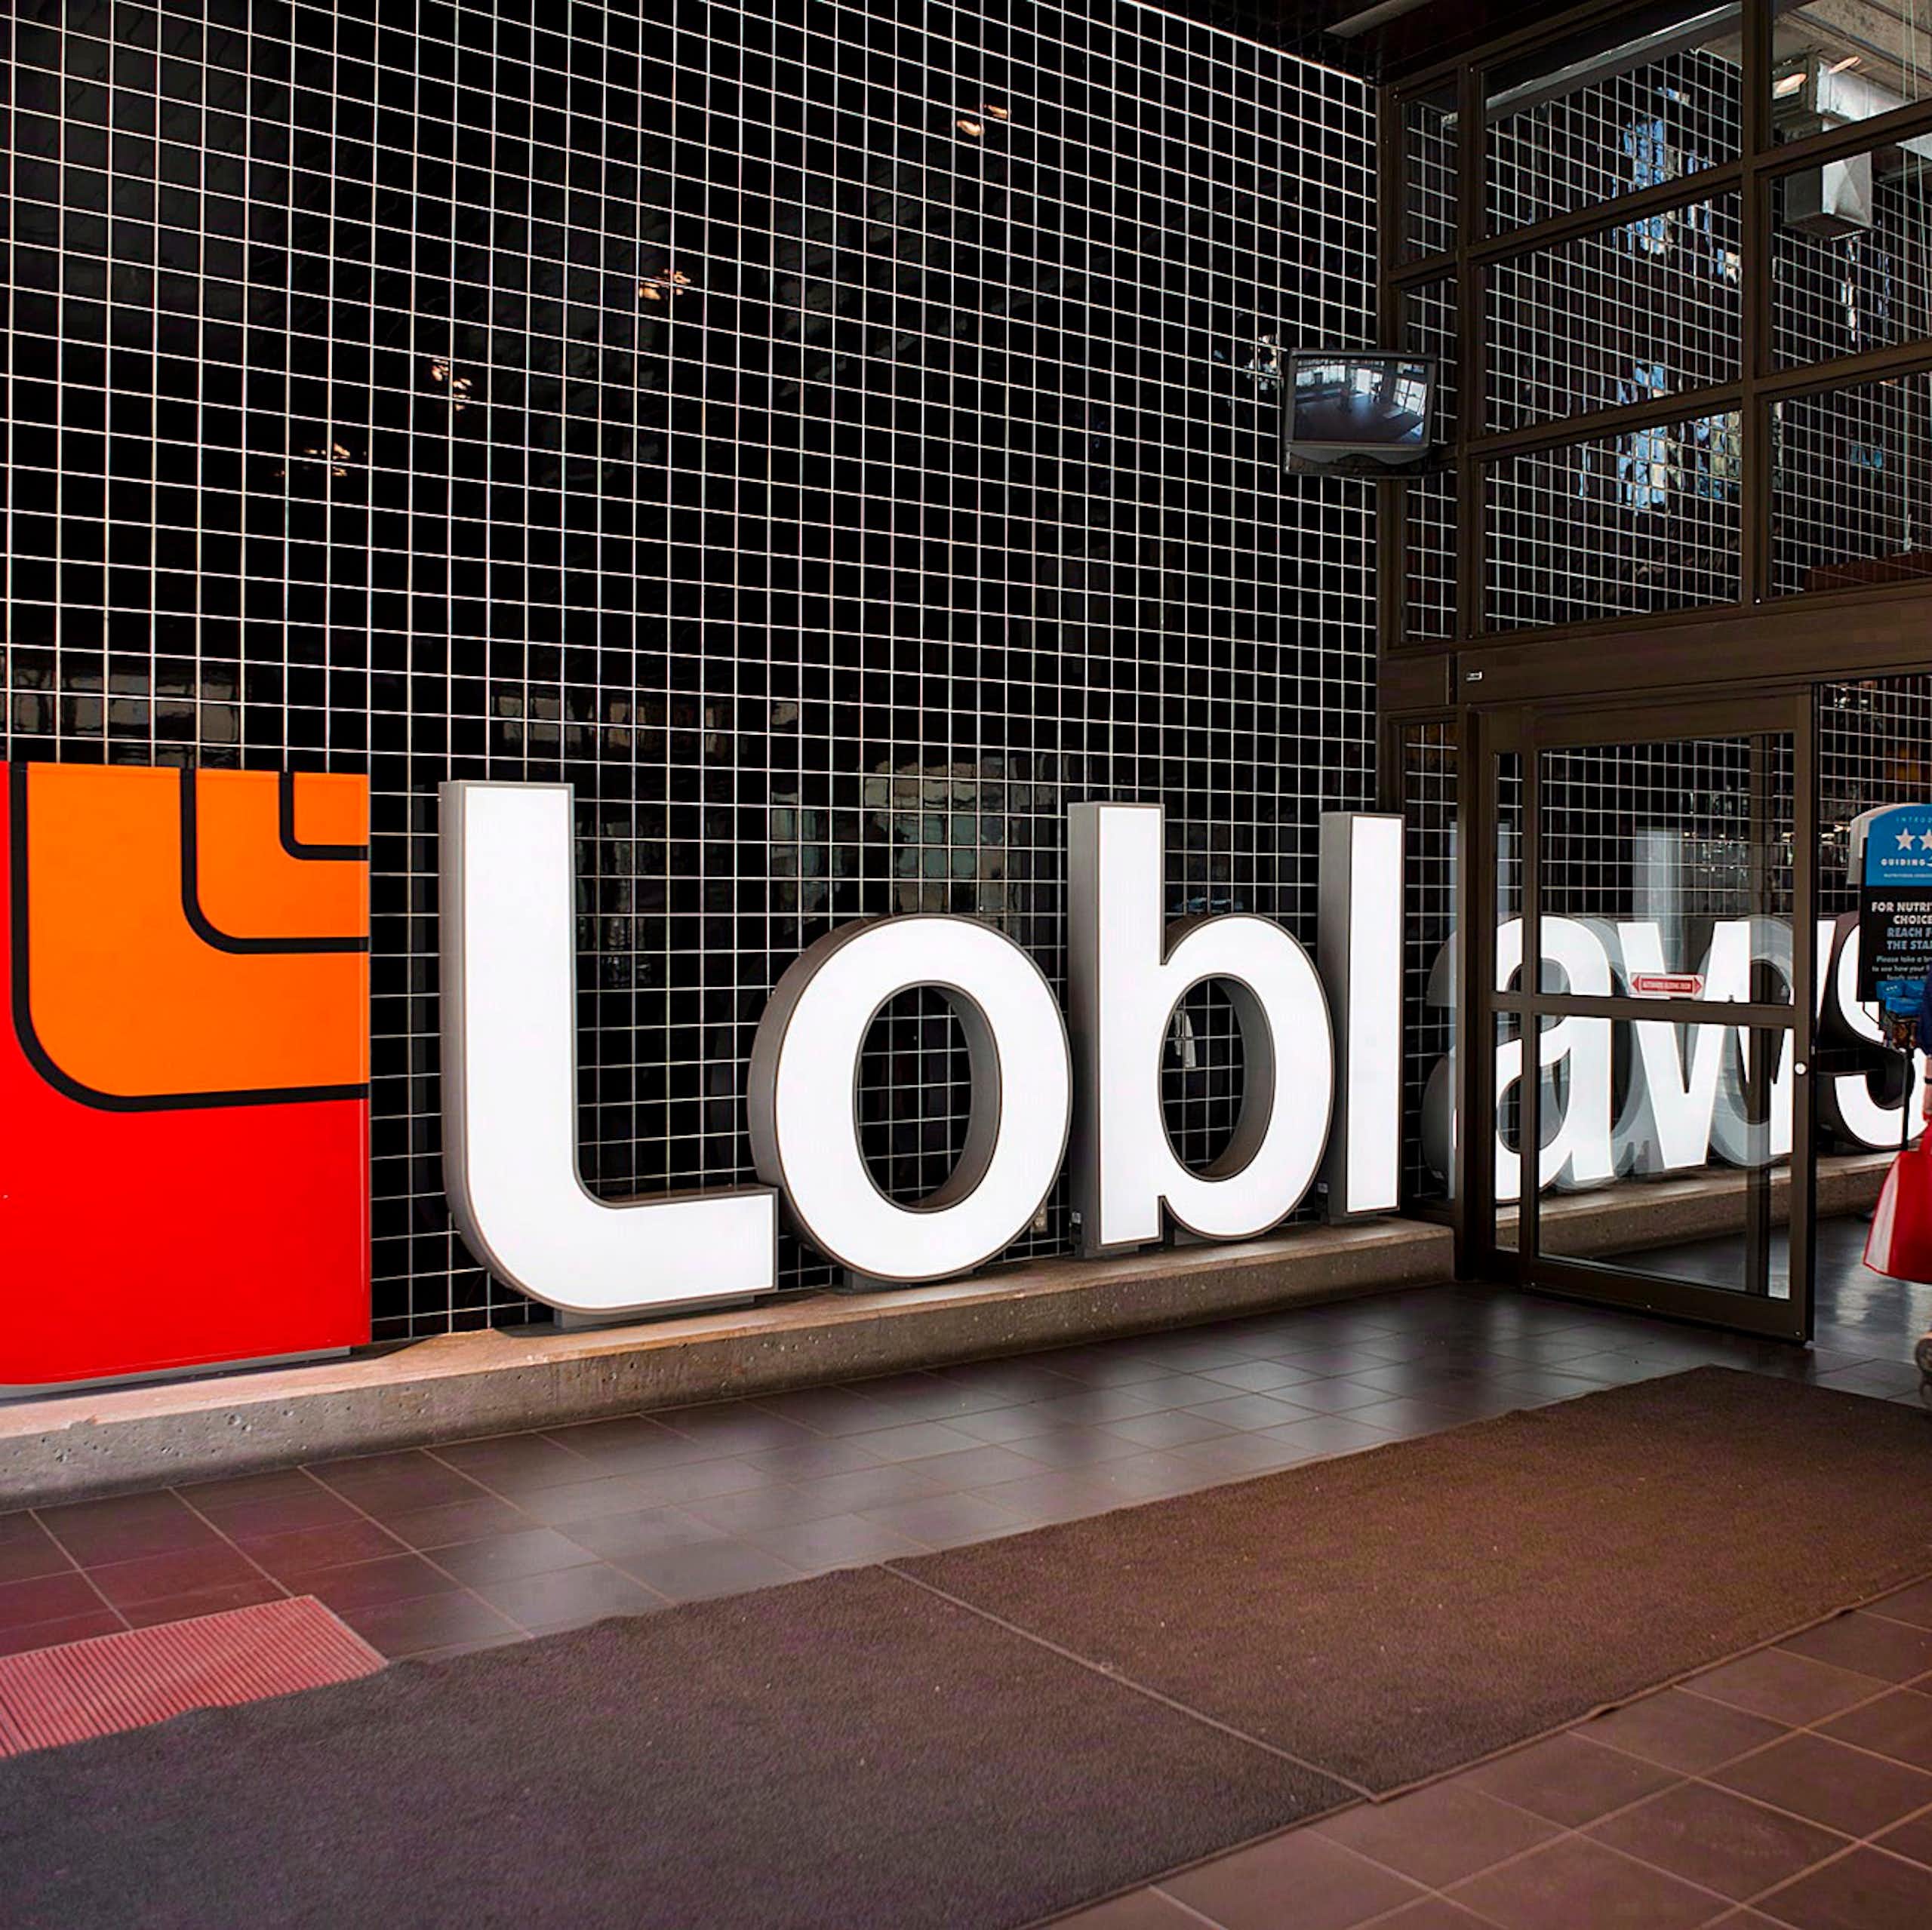 Loblaws boycott: What consumer psychology can tell us about the success of consumer activism